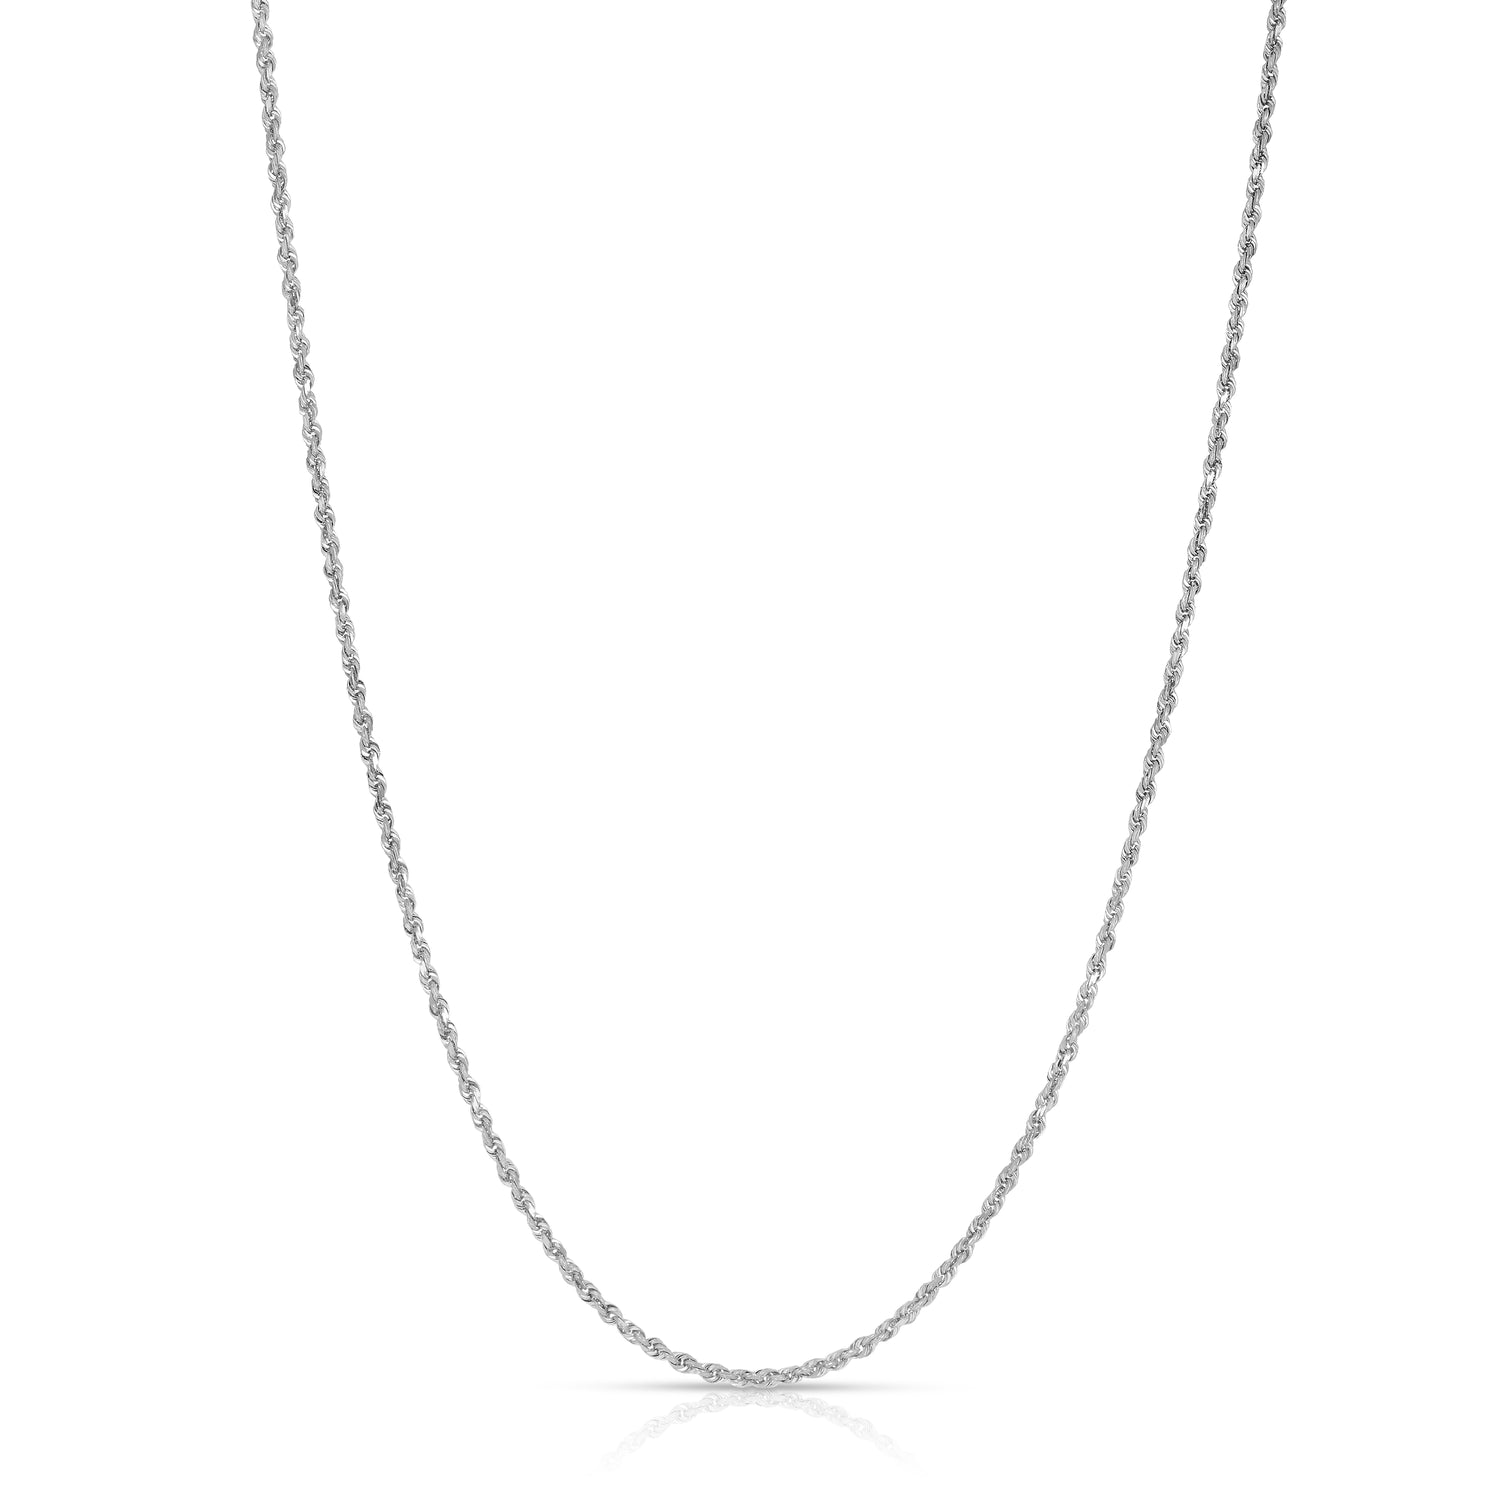 10k White Gold 1.5mm Solid Rope Chain Diamond Cut Necklace